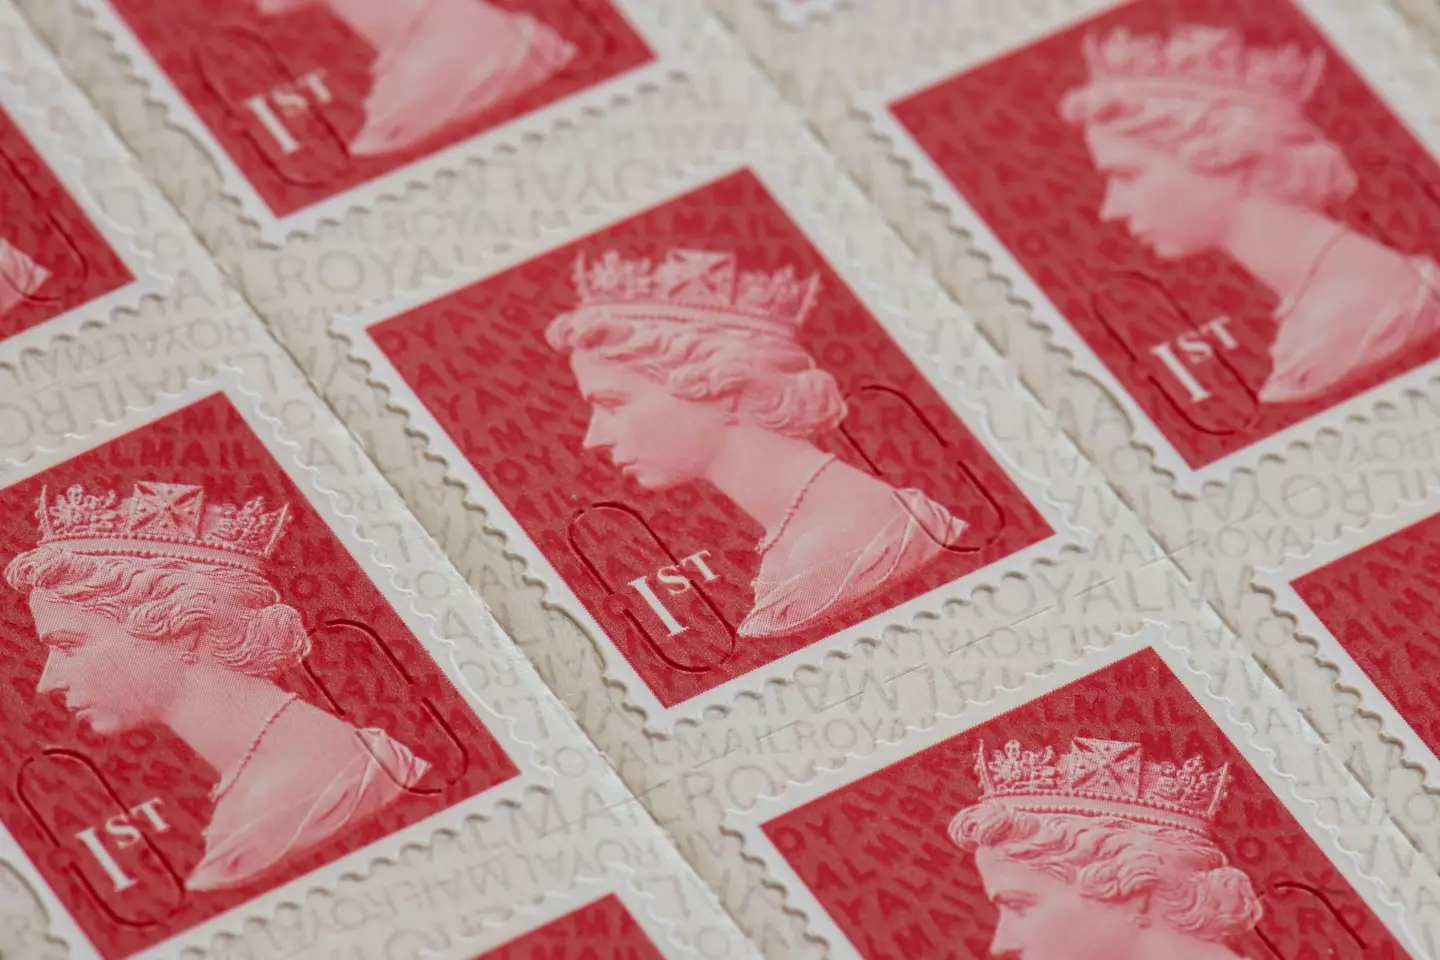 First class stamps.